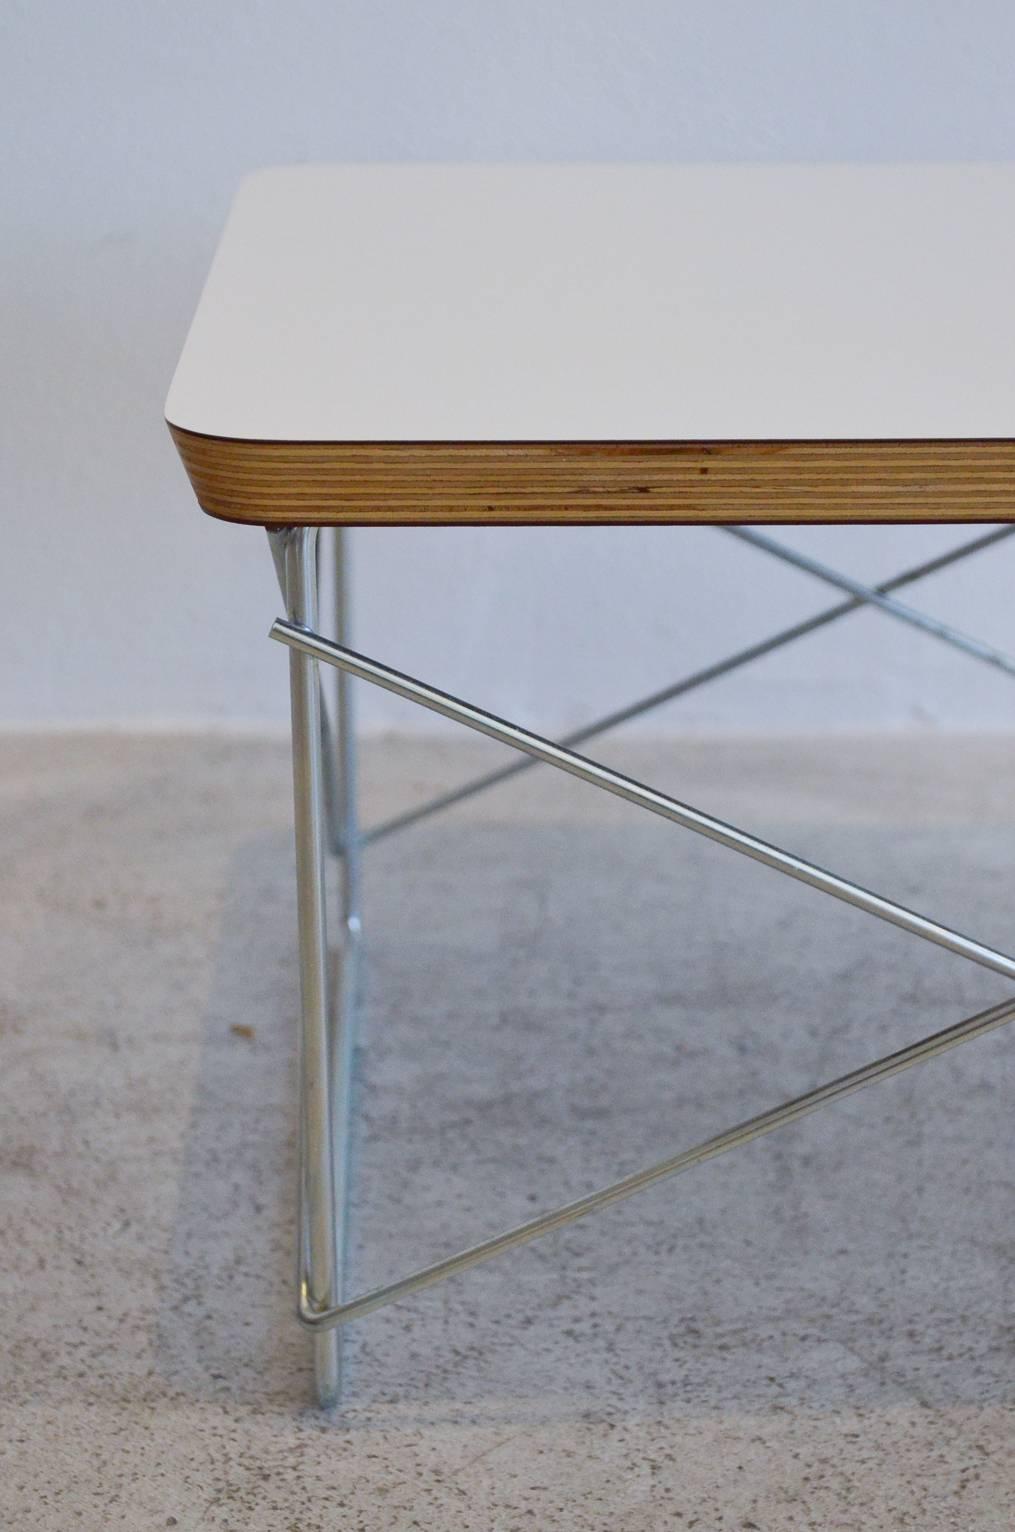 Original Eames LTR side table for Herman Miller.  Excellent condition, hardly any wear.  Beautifully preserved.

Measures 15.5